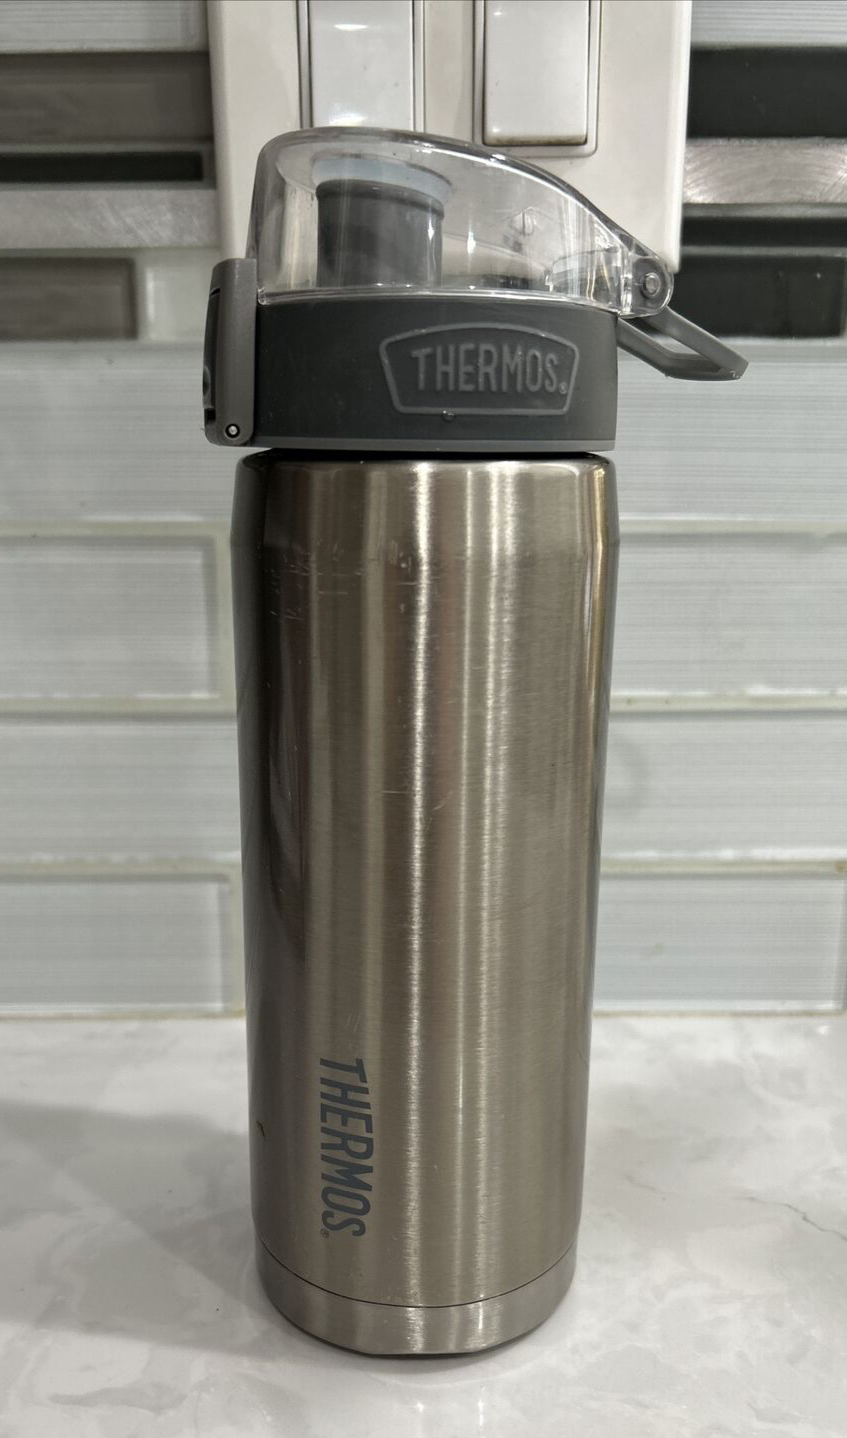 Primary image for Thermos 16 oz. Stainless Insulated Stainless Steel Beverage Bottle